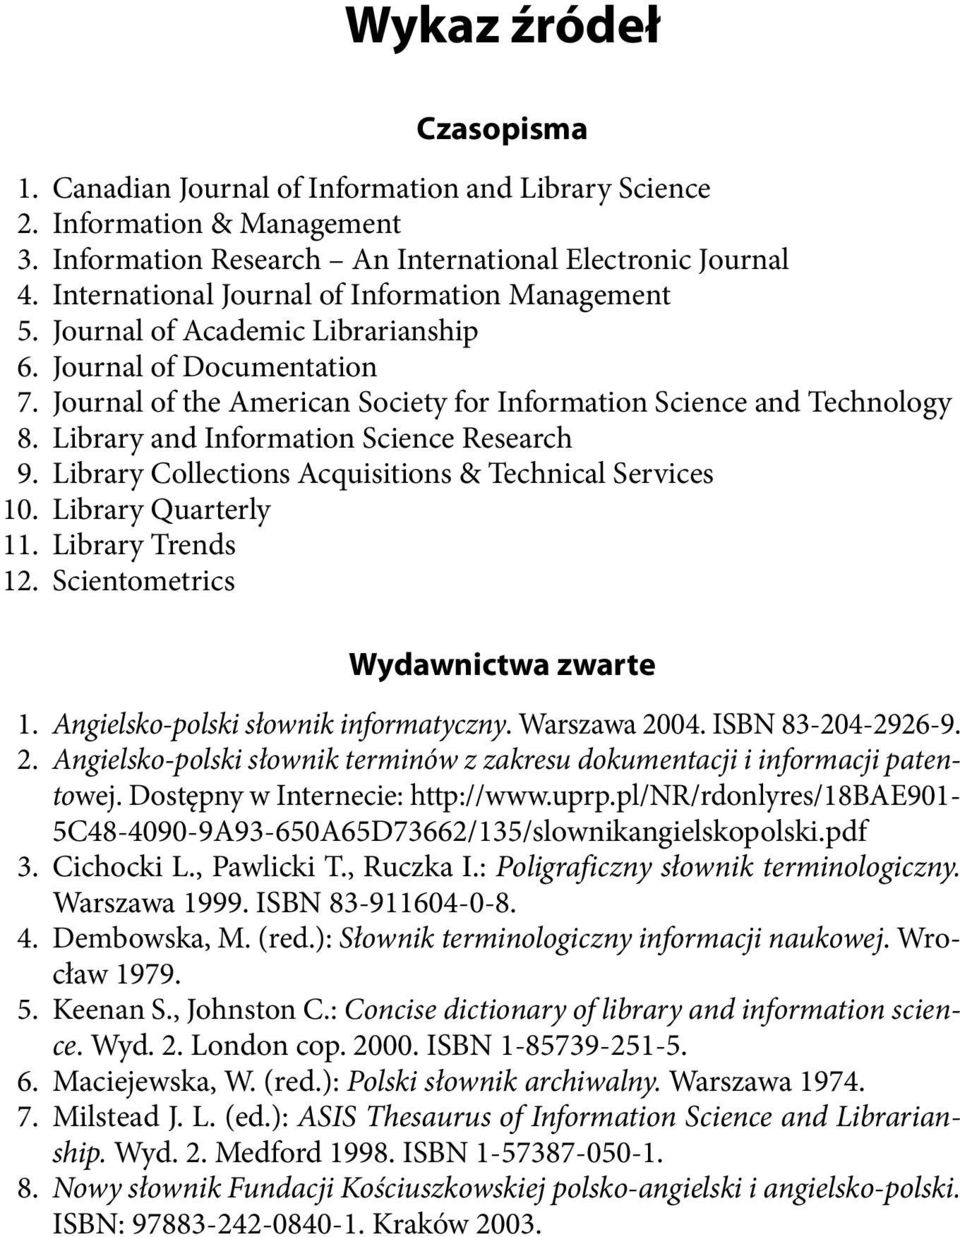 Library and Information Science Research 9. Library Collections Acquisitions & Technical Services 10. Library Quarterly 11. Library Trends 12. Scientometrics Wydawnictwa zwarte 1.